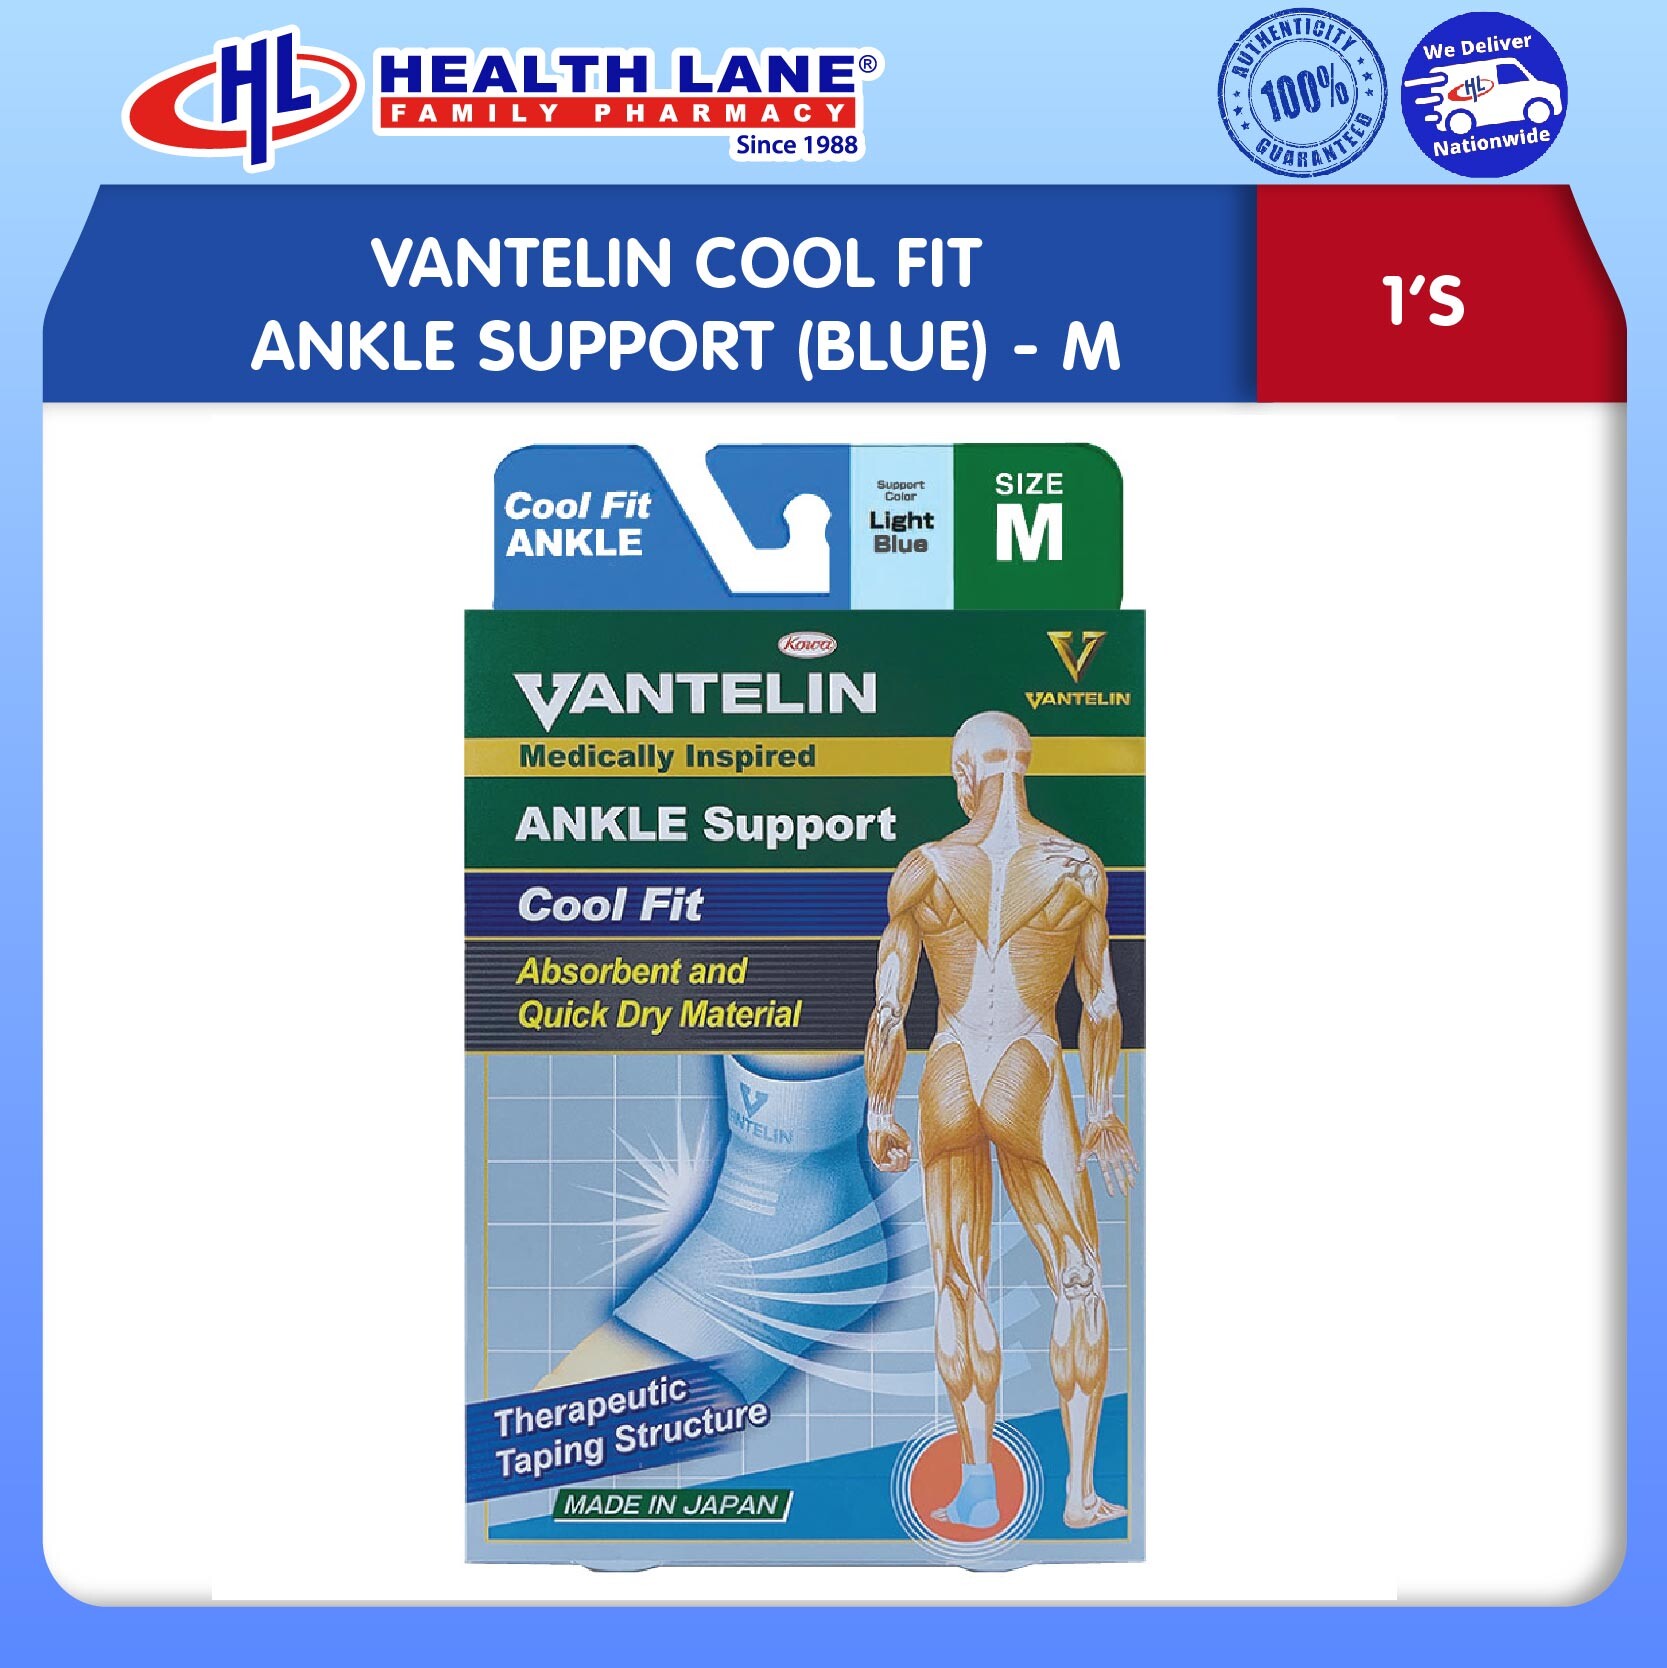 VANTELIN COOL FIT ANKLE SUPPORT (BLUE) - (M)